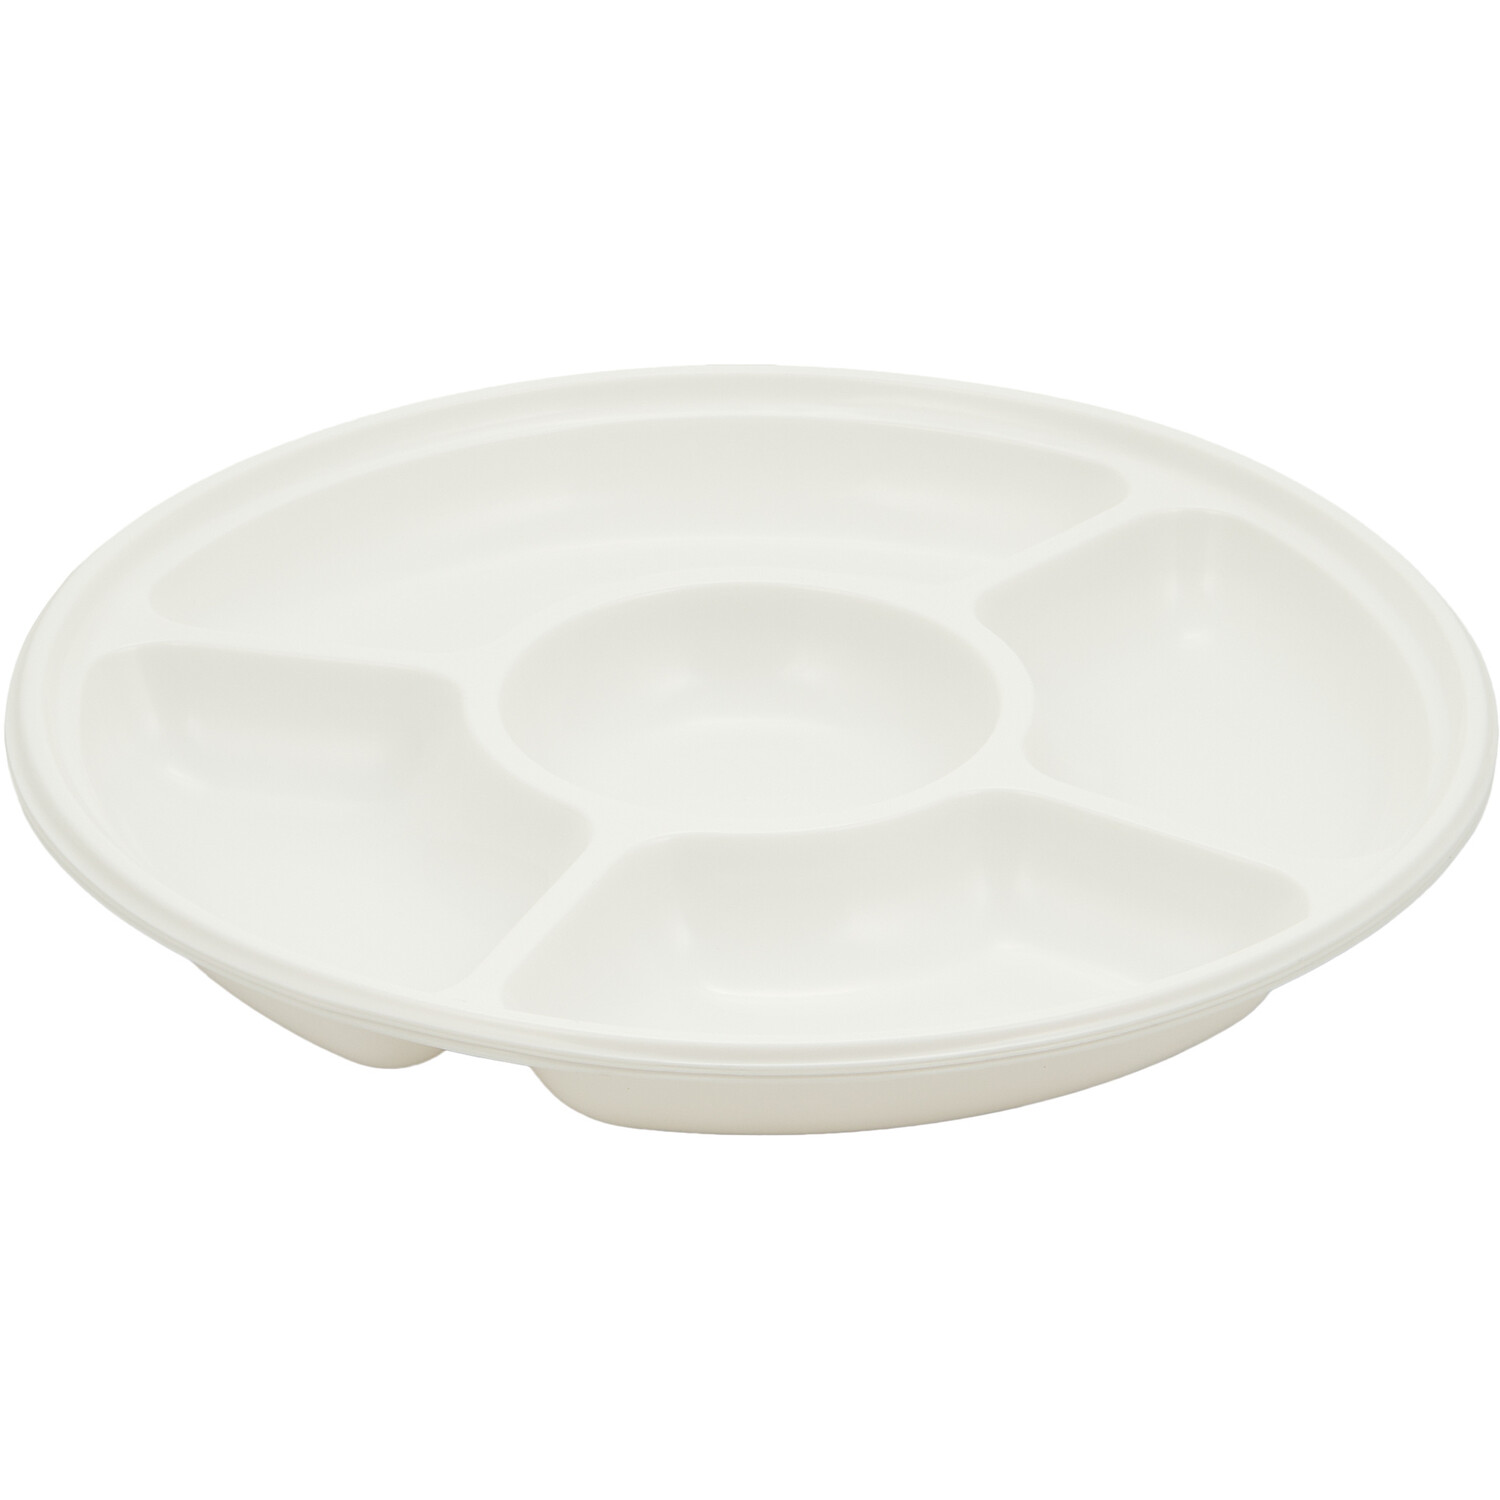 Pack of 3 Chip and Dip Platters - White Image 5